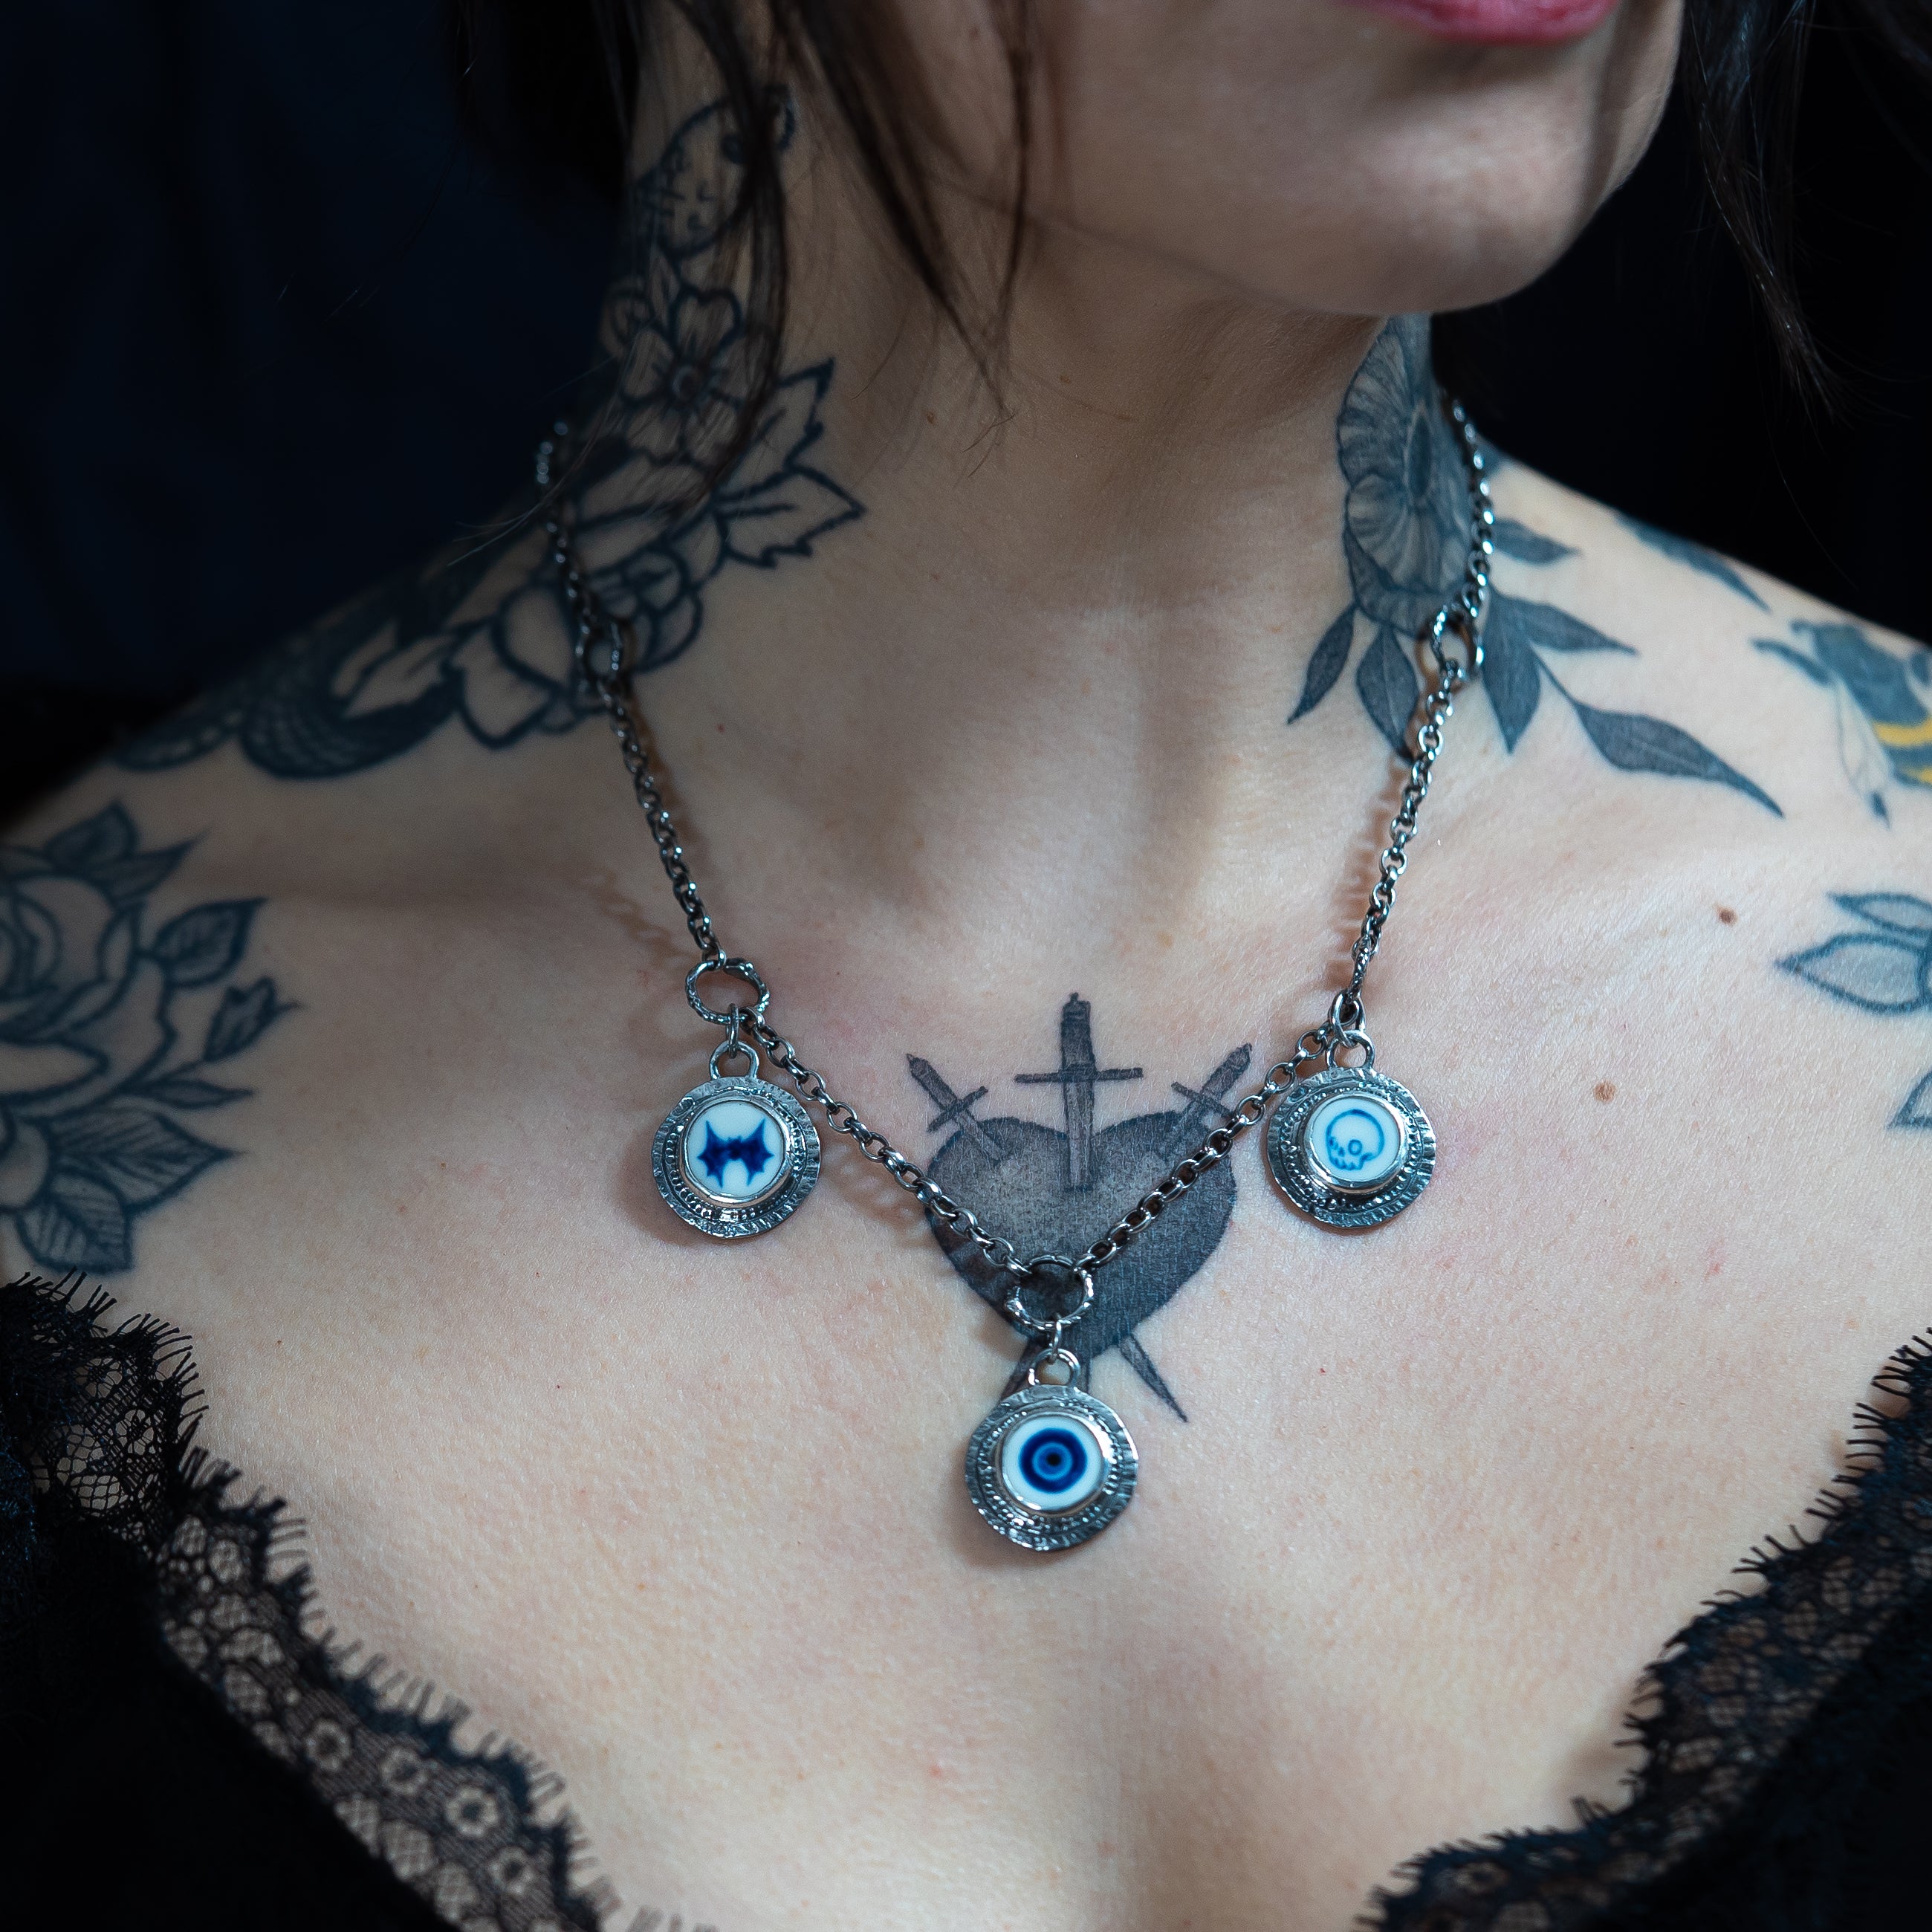 charm necklace with 3 hand painted porcelain and silver coin charms on a tattooed model